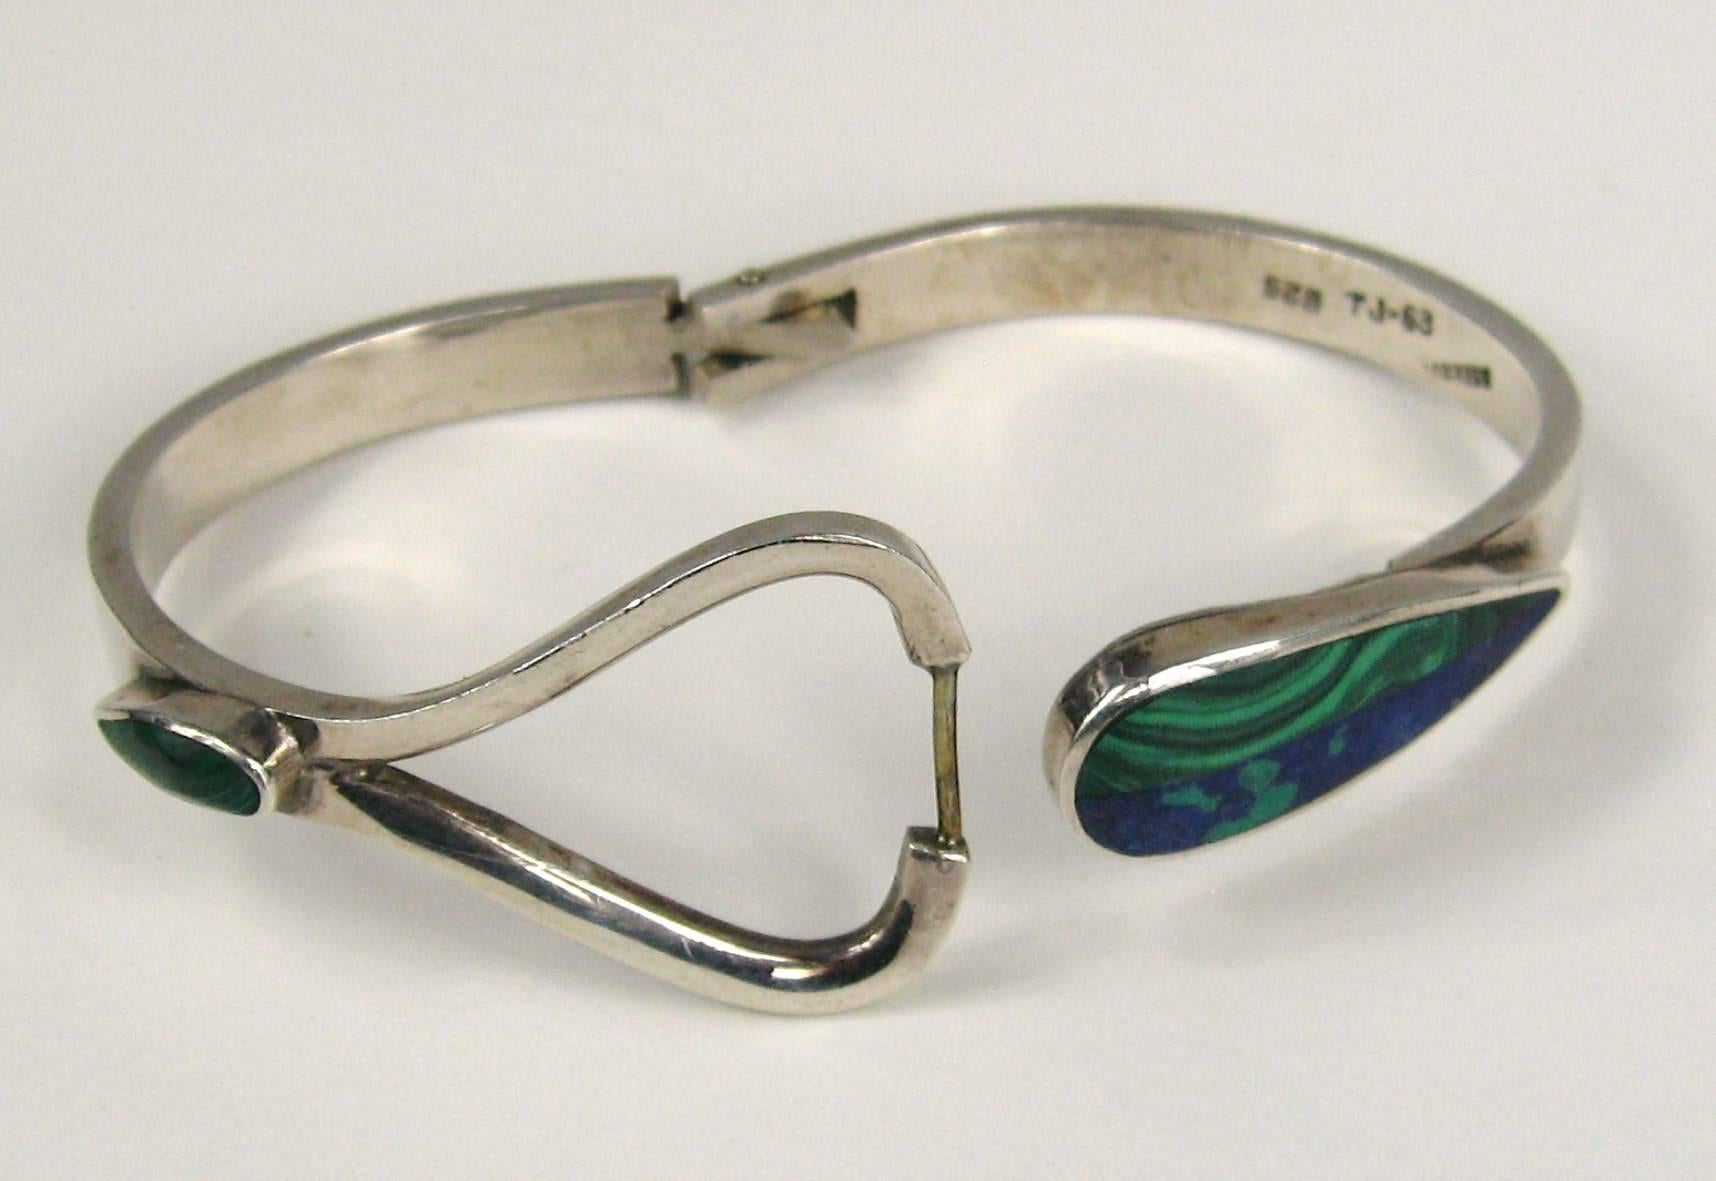 Fabulous Malachite and Lapis sterling silver bracelet. Bracelet has a hidden latch under the bezel set Lapis - Malachite stone, hinged back. Hallmarked inside the bracelet  1.12 inches at widest This is oval in shape an will fit a 6 inch up to a 7.5